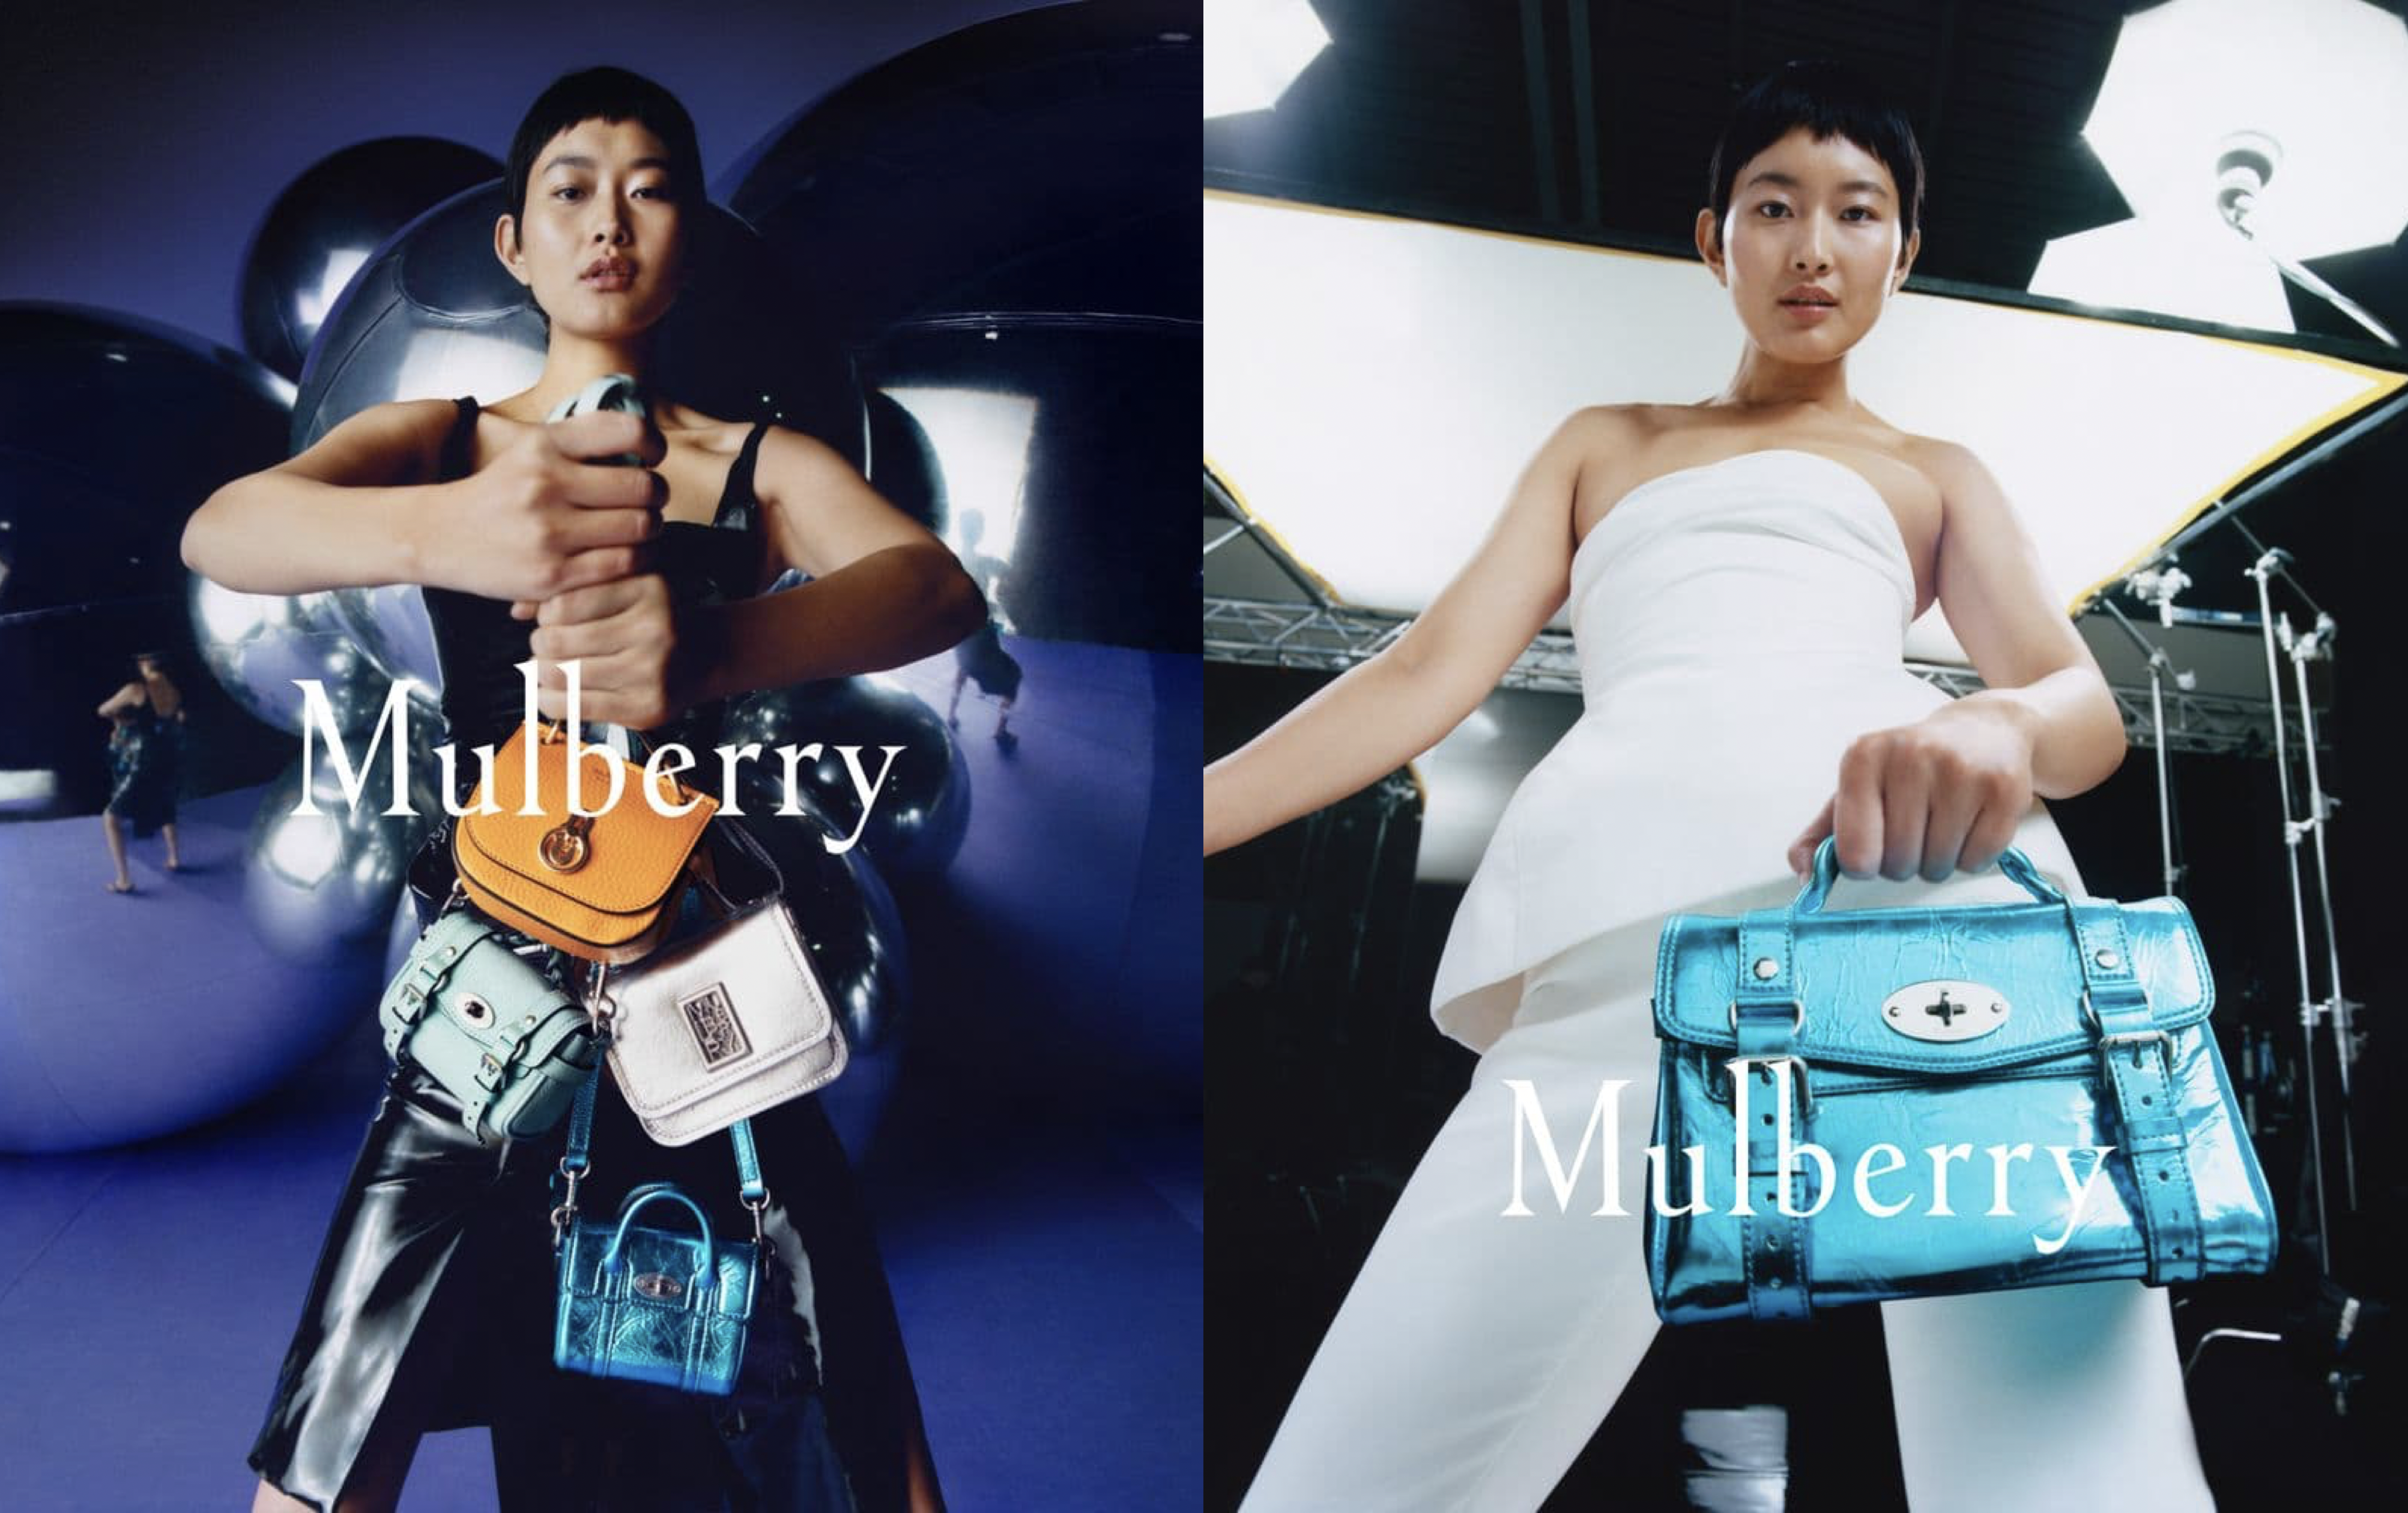 Mulberry Holiday Ad Campaign 2022